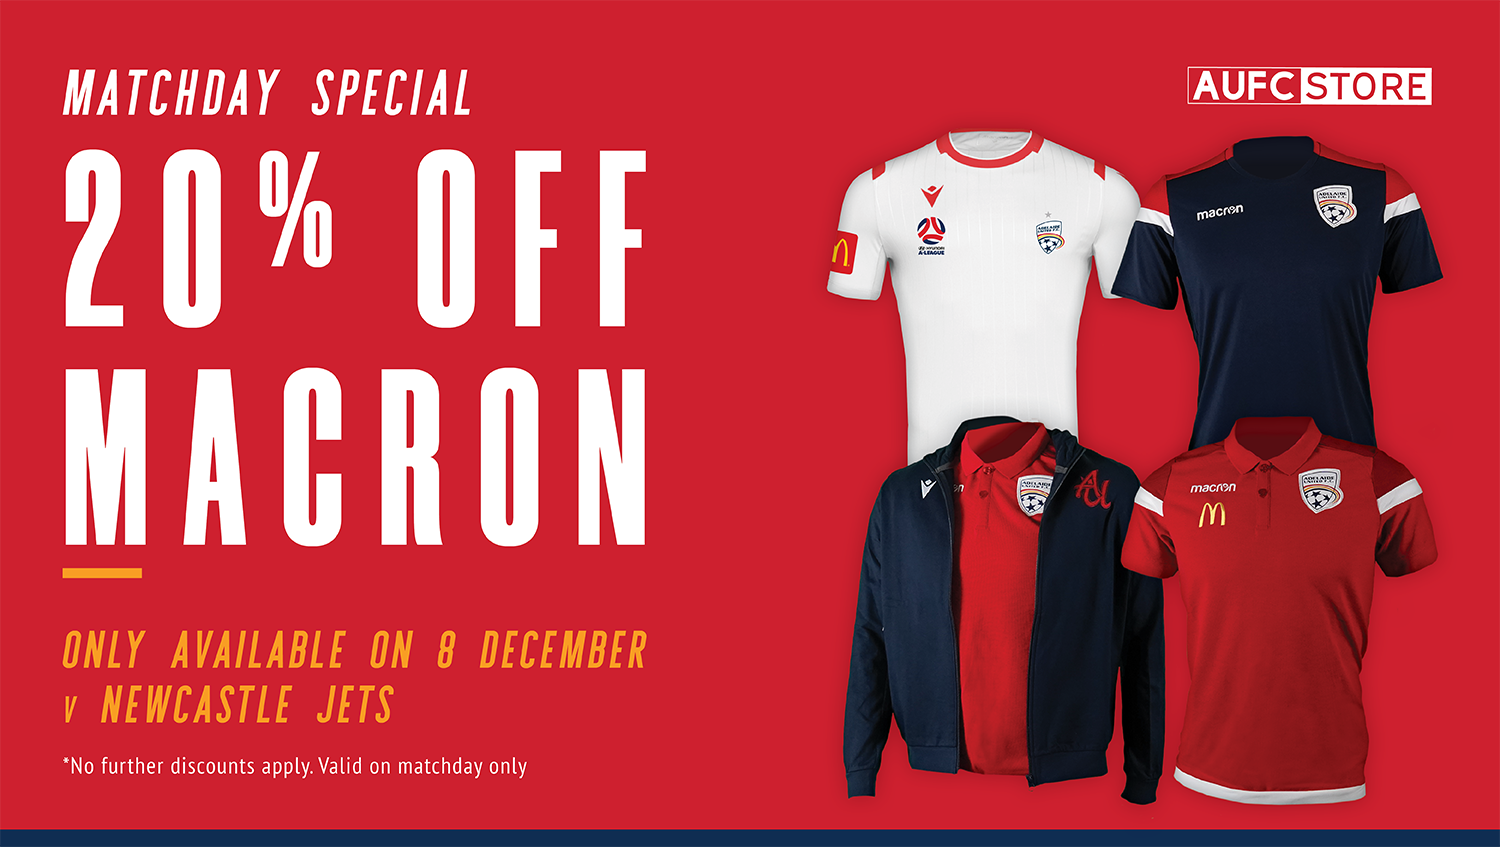 Adelaide United 20% off Macron game day only